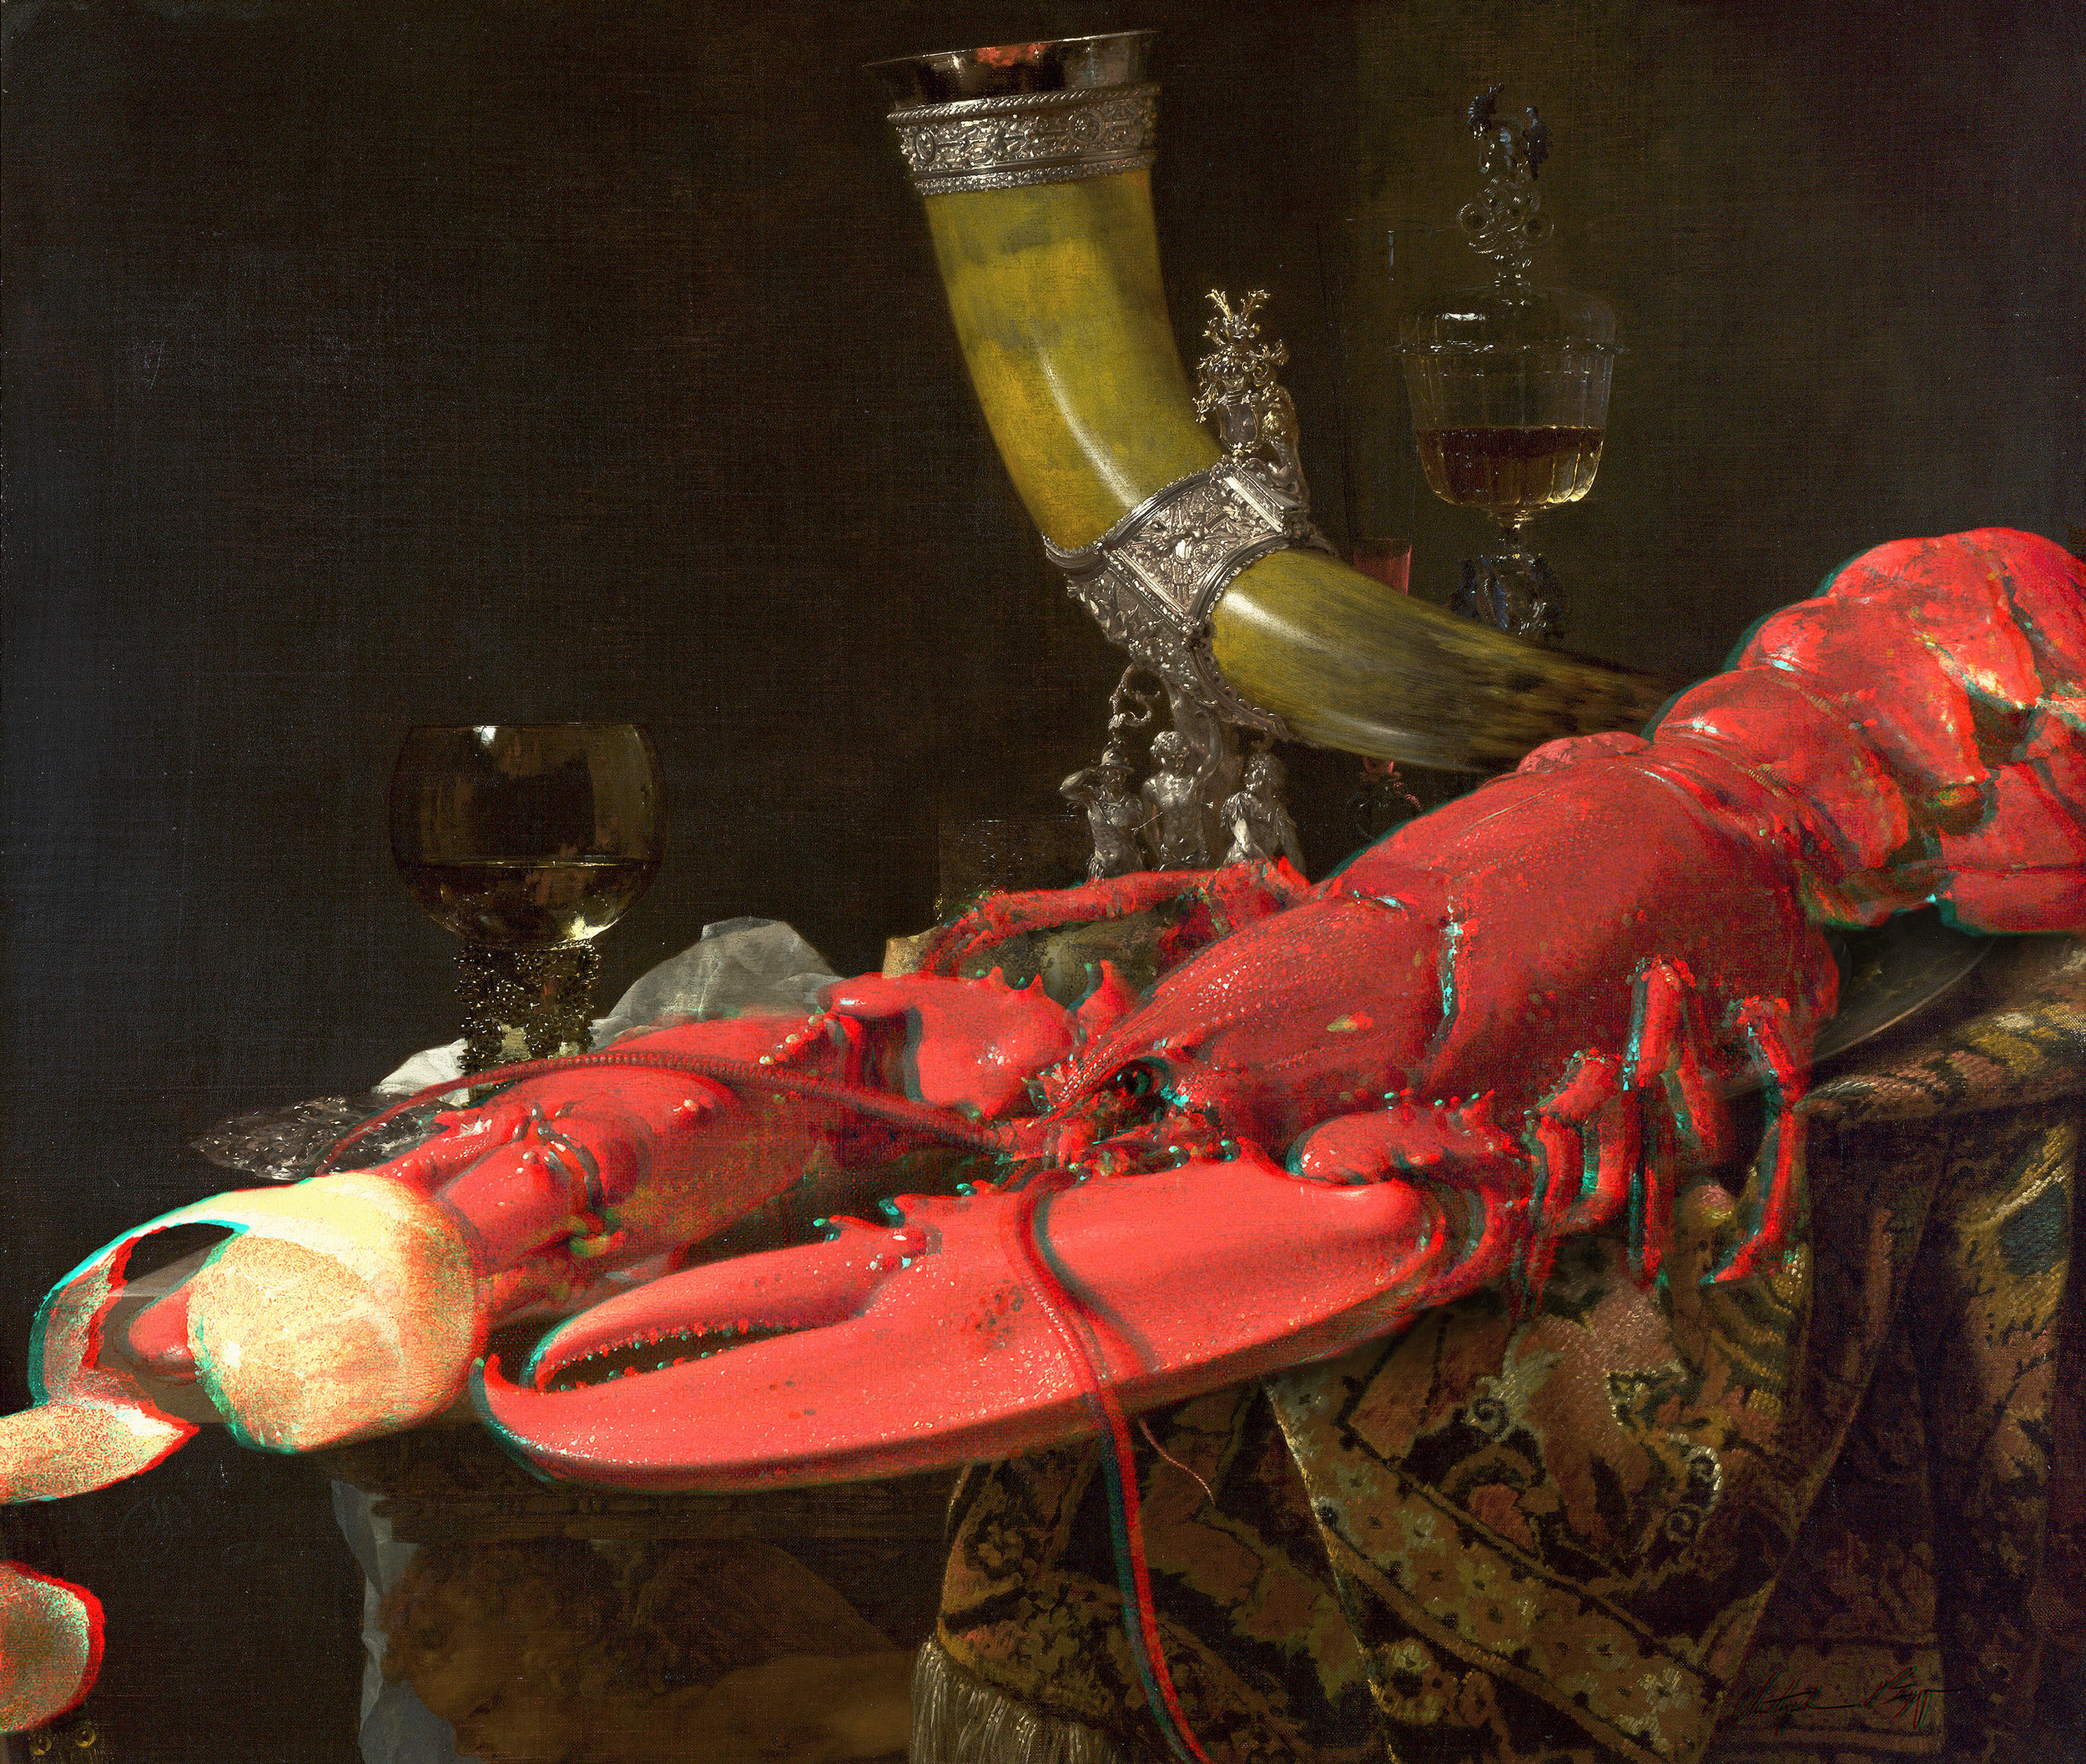   Lobster Anaglyph #3 (Still Life with Drinking-Horn, Willem Kalf, 1653)  2017 3D anaglyph digital UV adhesive wall fabric, 3D anaglyph glasses 34 × 40.2 inches 